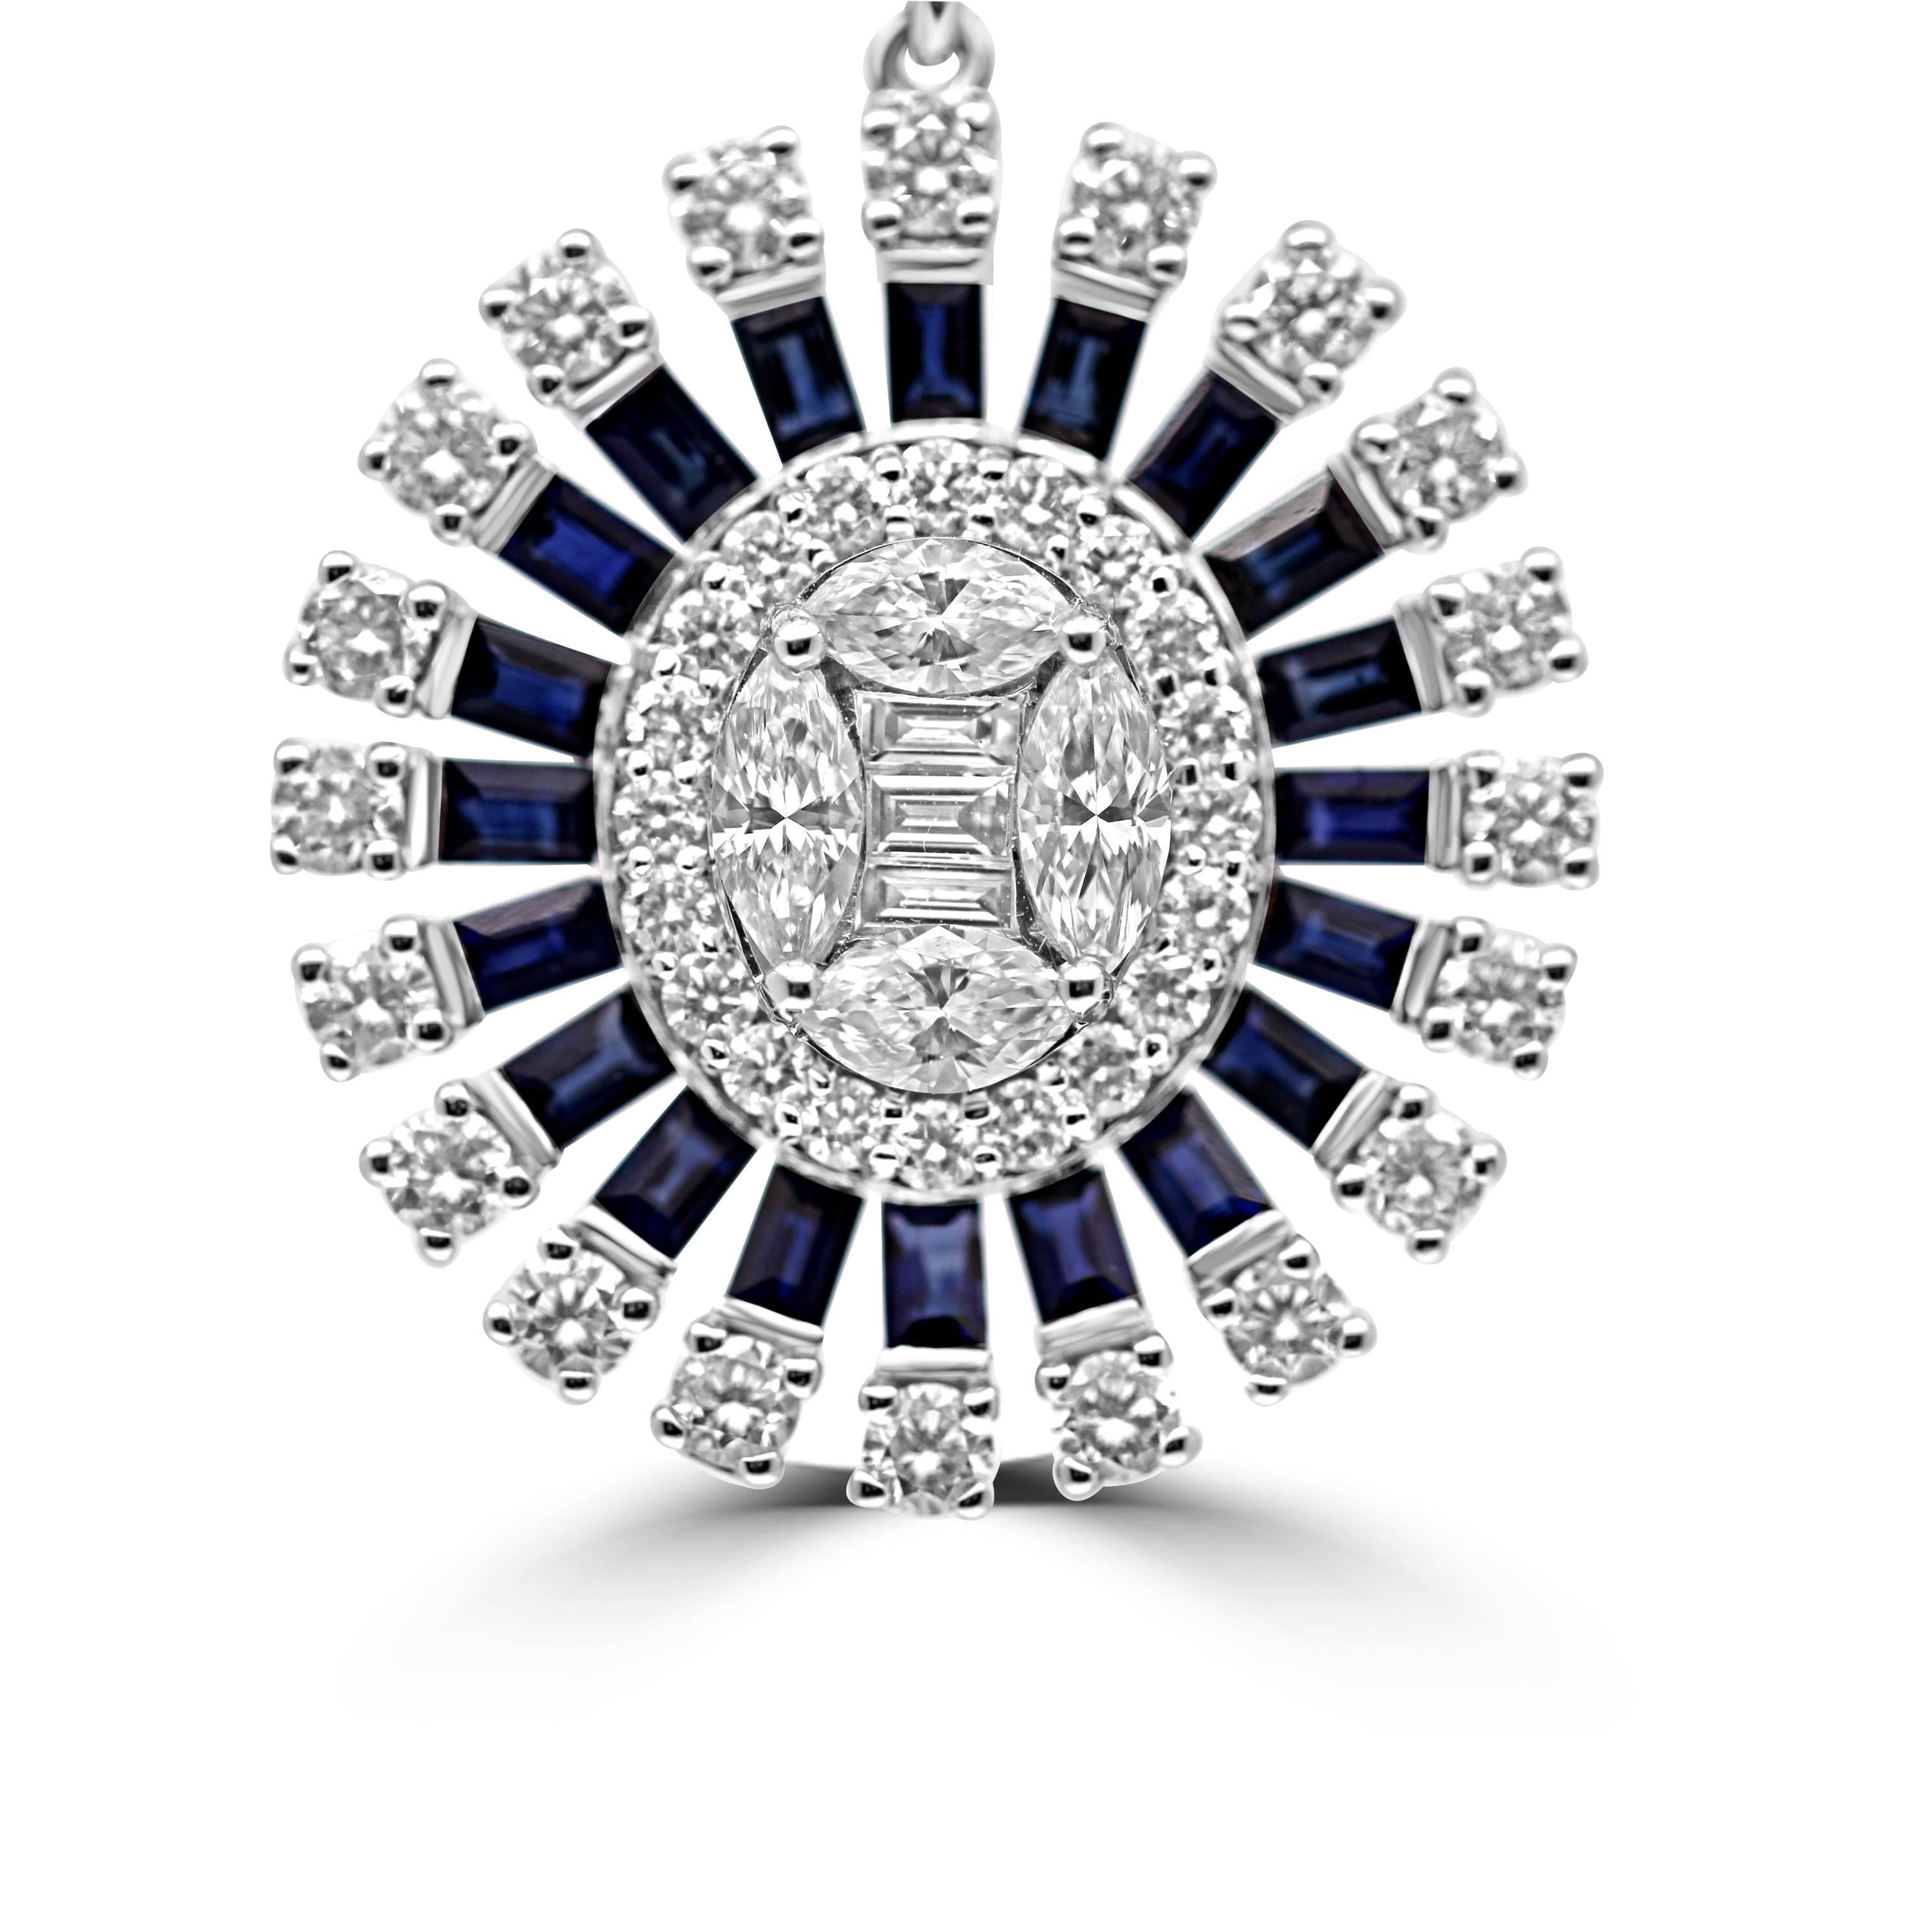 Gorgeous pendant necklace that will stand out in any occasion.
Diamonds and sapphire gemstones mounted in 18kt white gold.
1.48ct of fancy shape diamonds, marquise, baguettes and brilliant cut diamonds,
set with 1.01ct deep blue elongated baguette